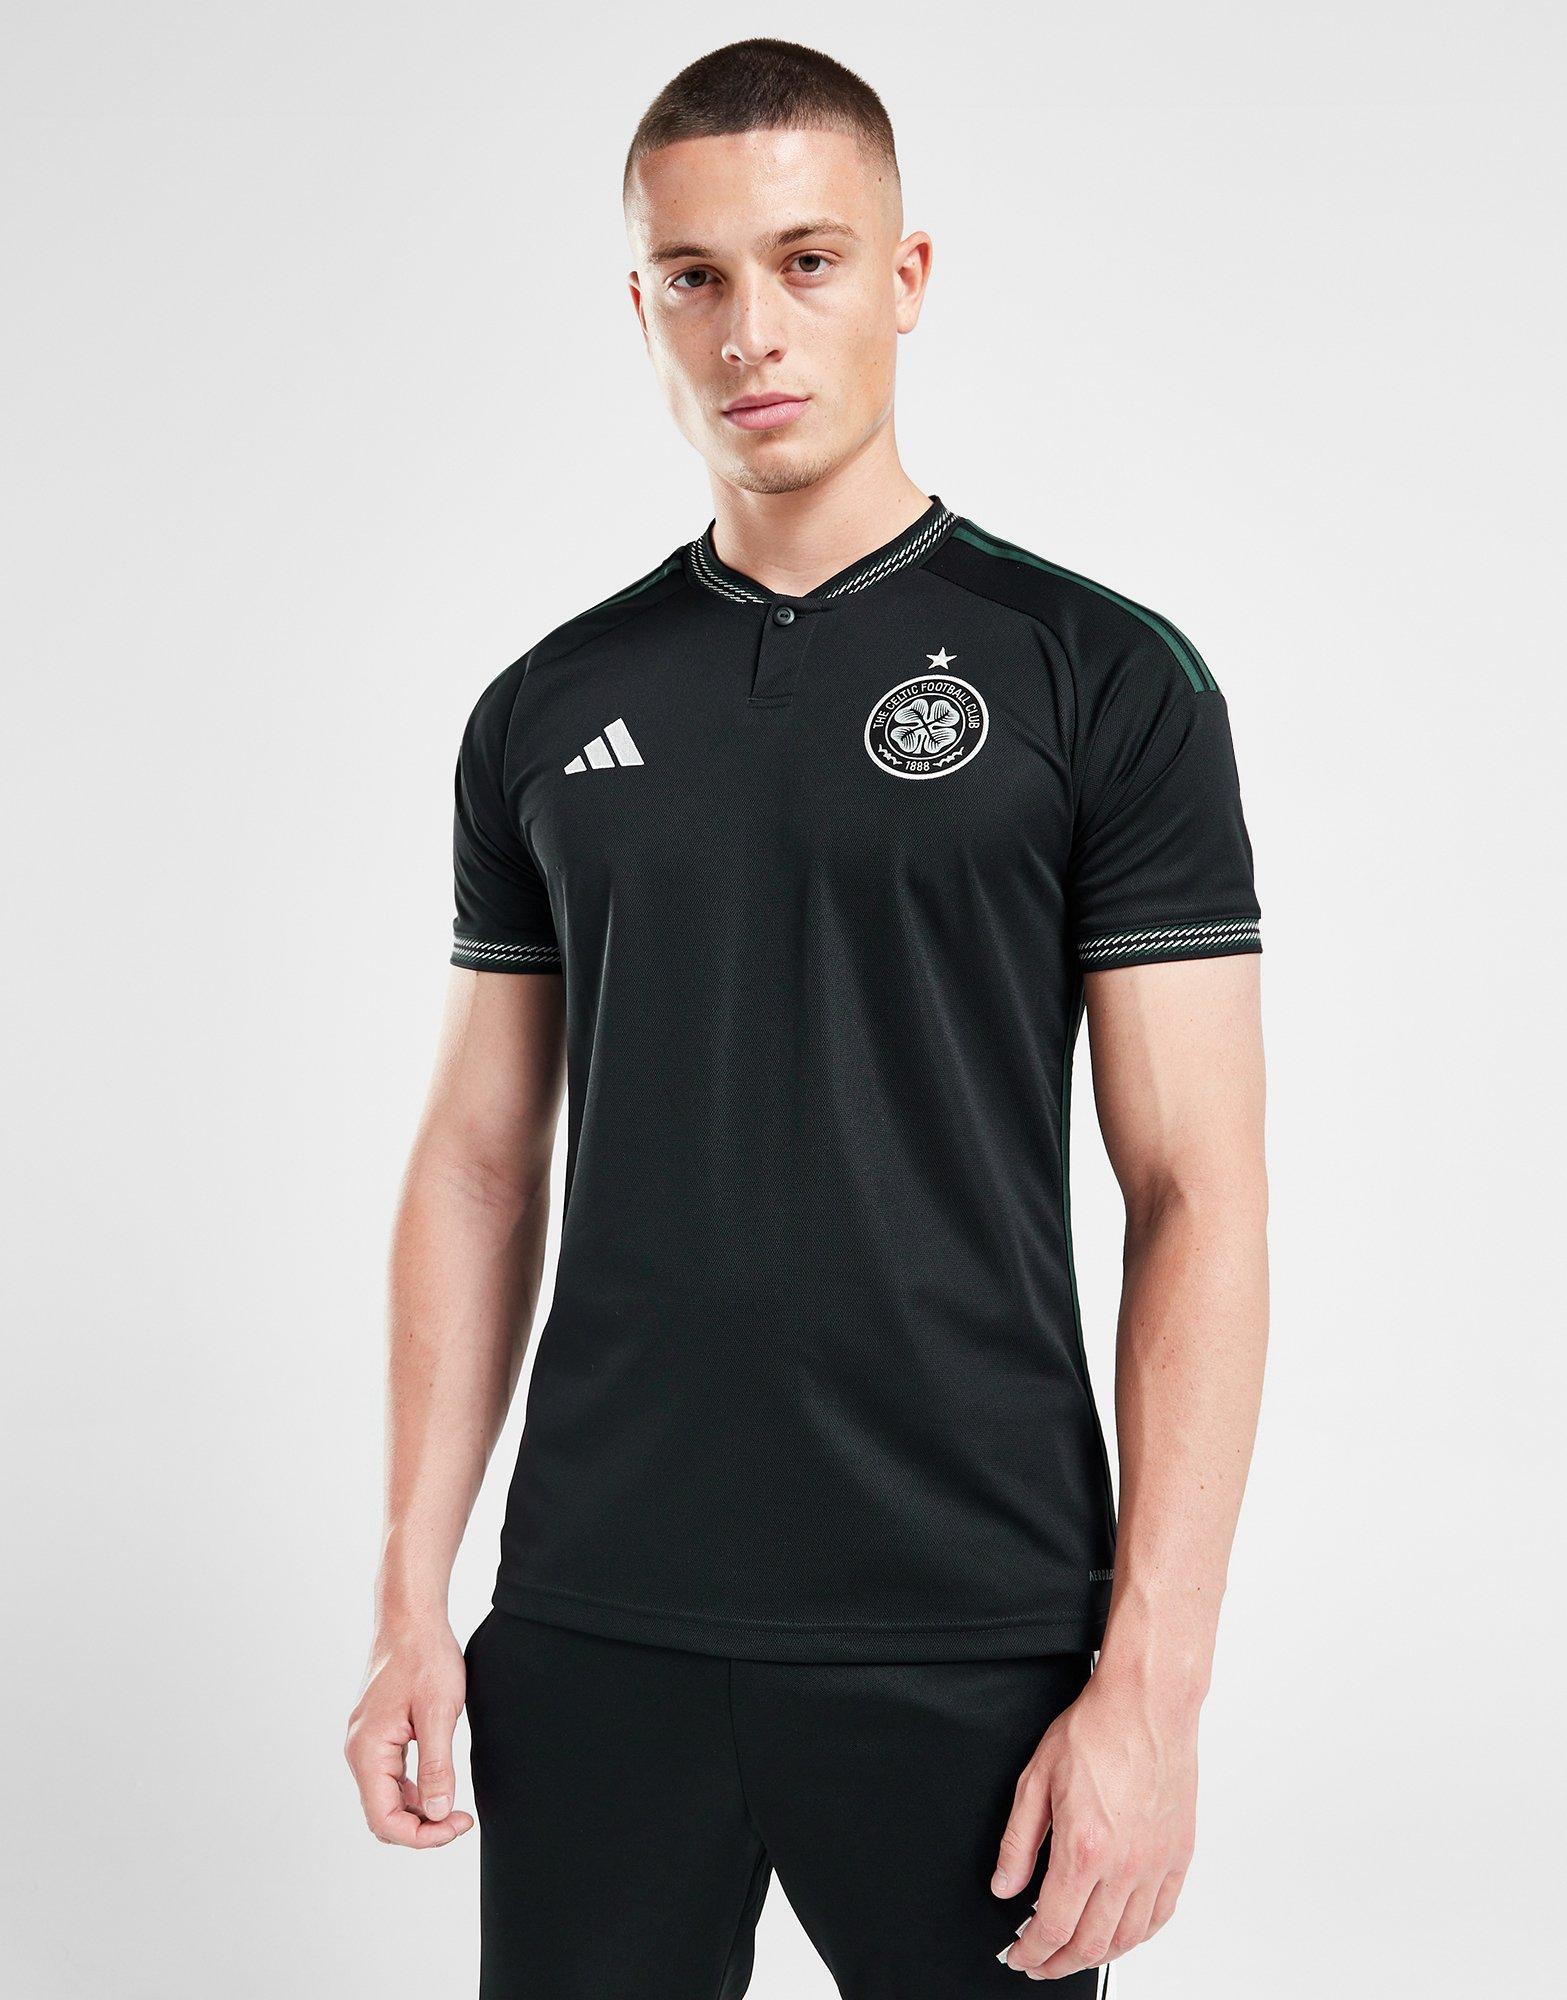 SHIRT OF THE YEAR CONTENDER 🔥 Adidas 2023-24 Celtic Away Shirt Review 